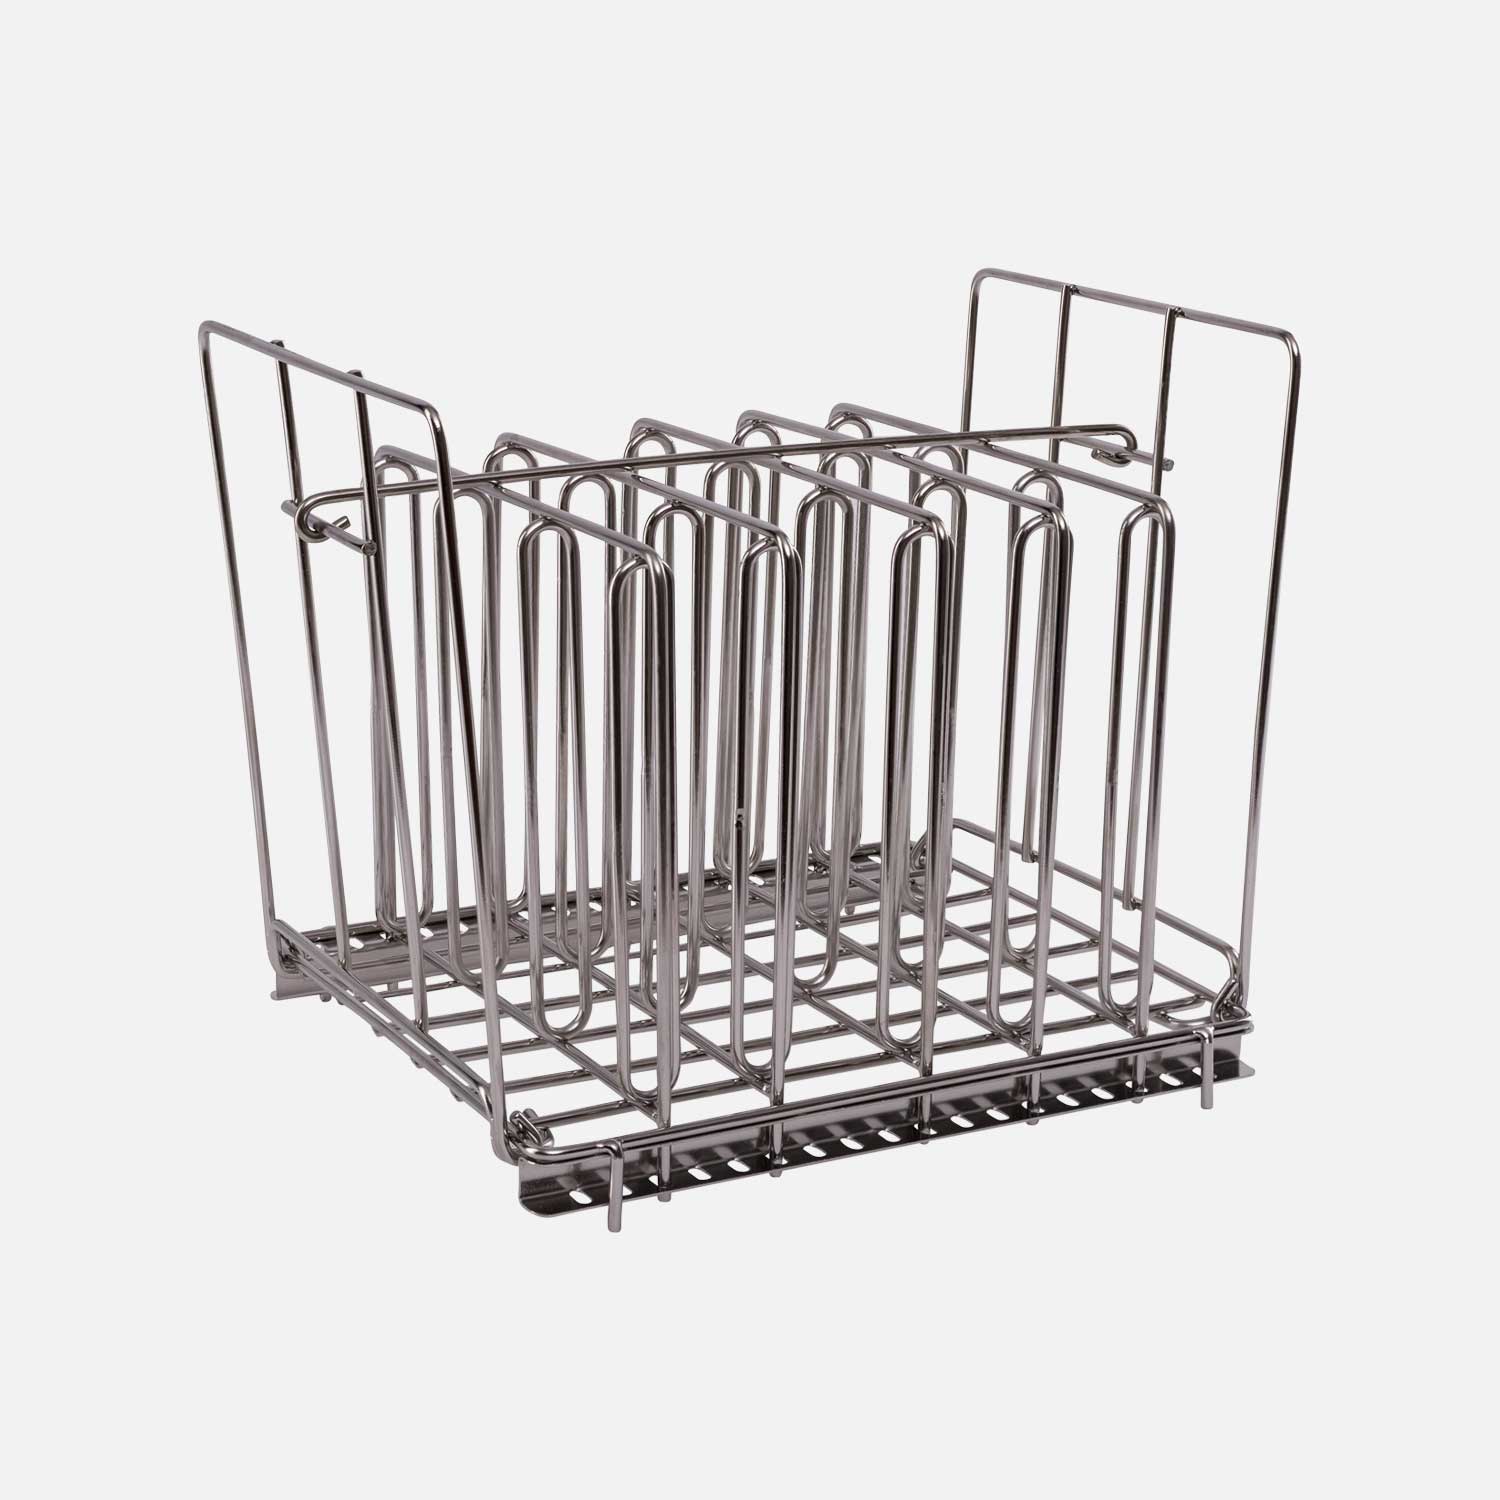 Large stainless steel bag holder, capable of holding up to 6 cooking bags